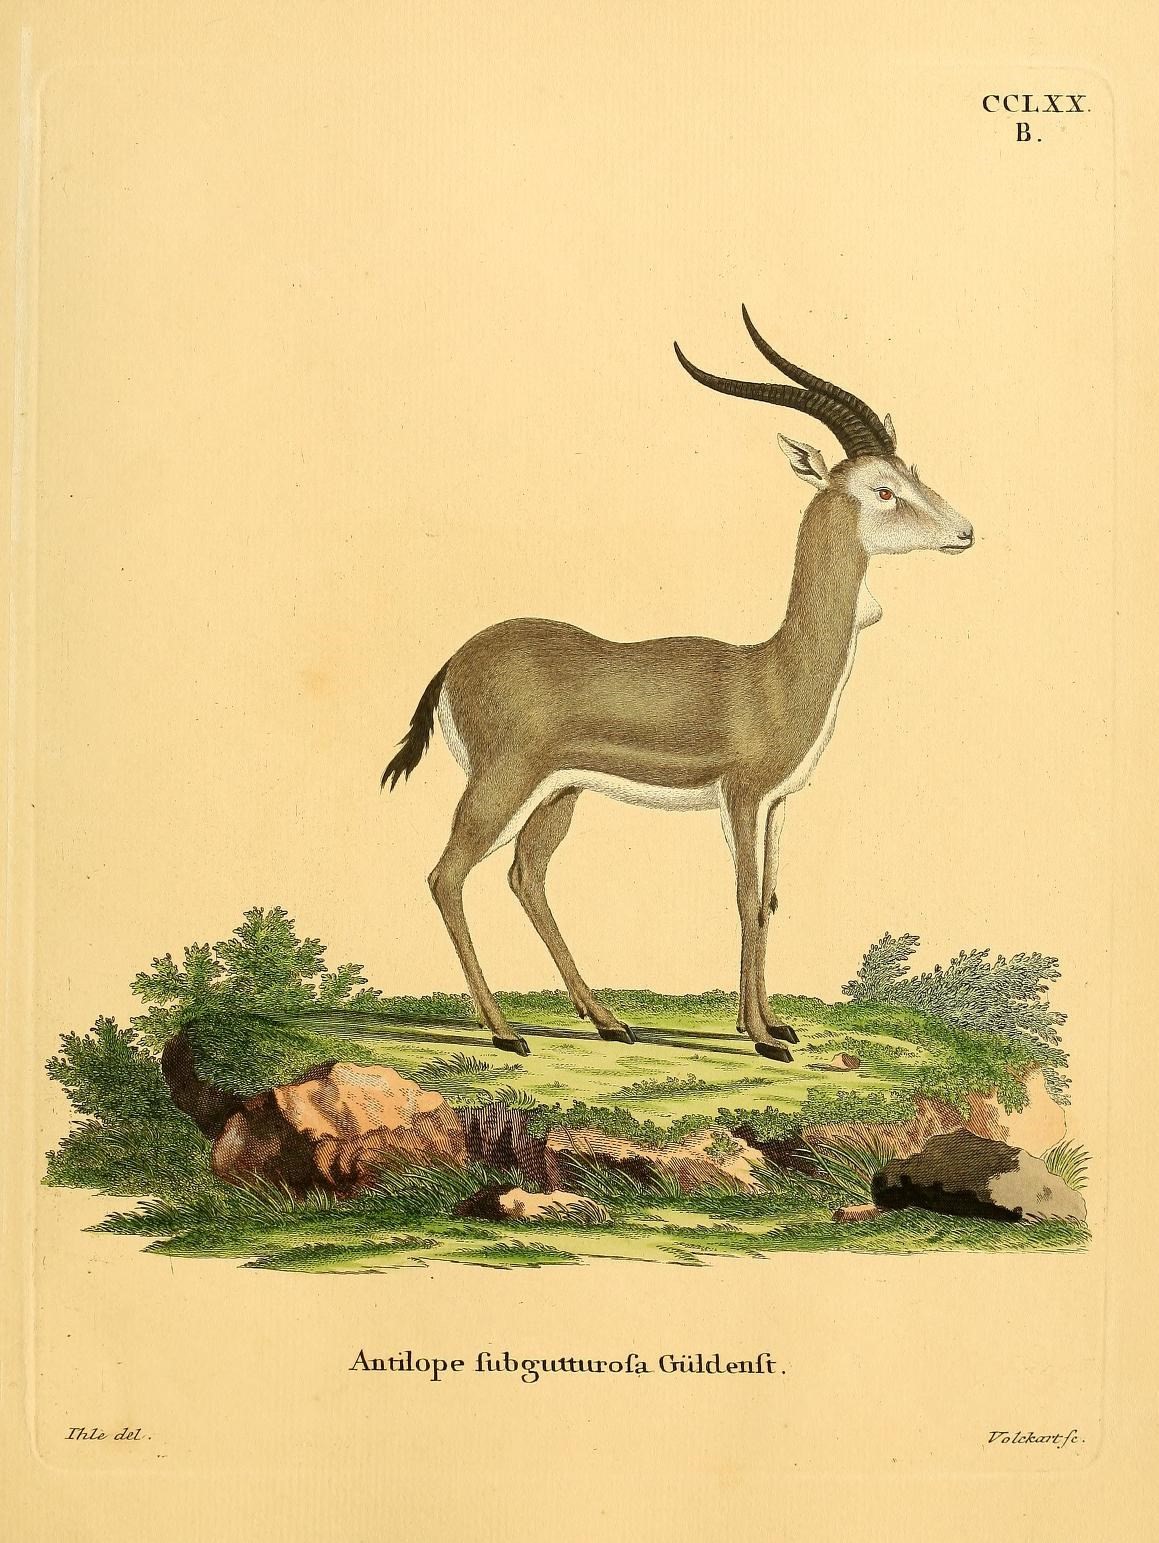 an antelope is shown in this antique color engraving